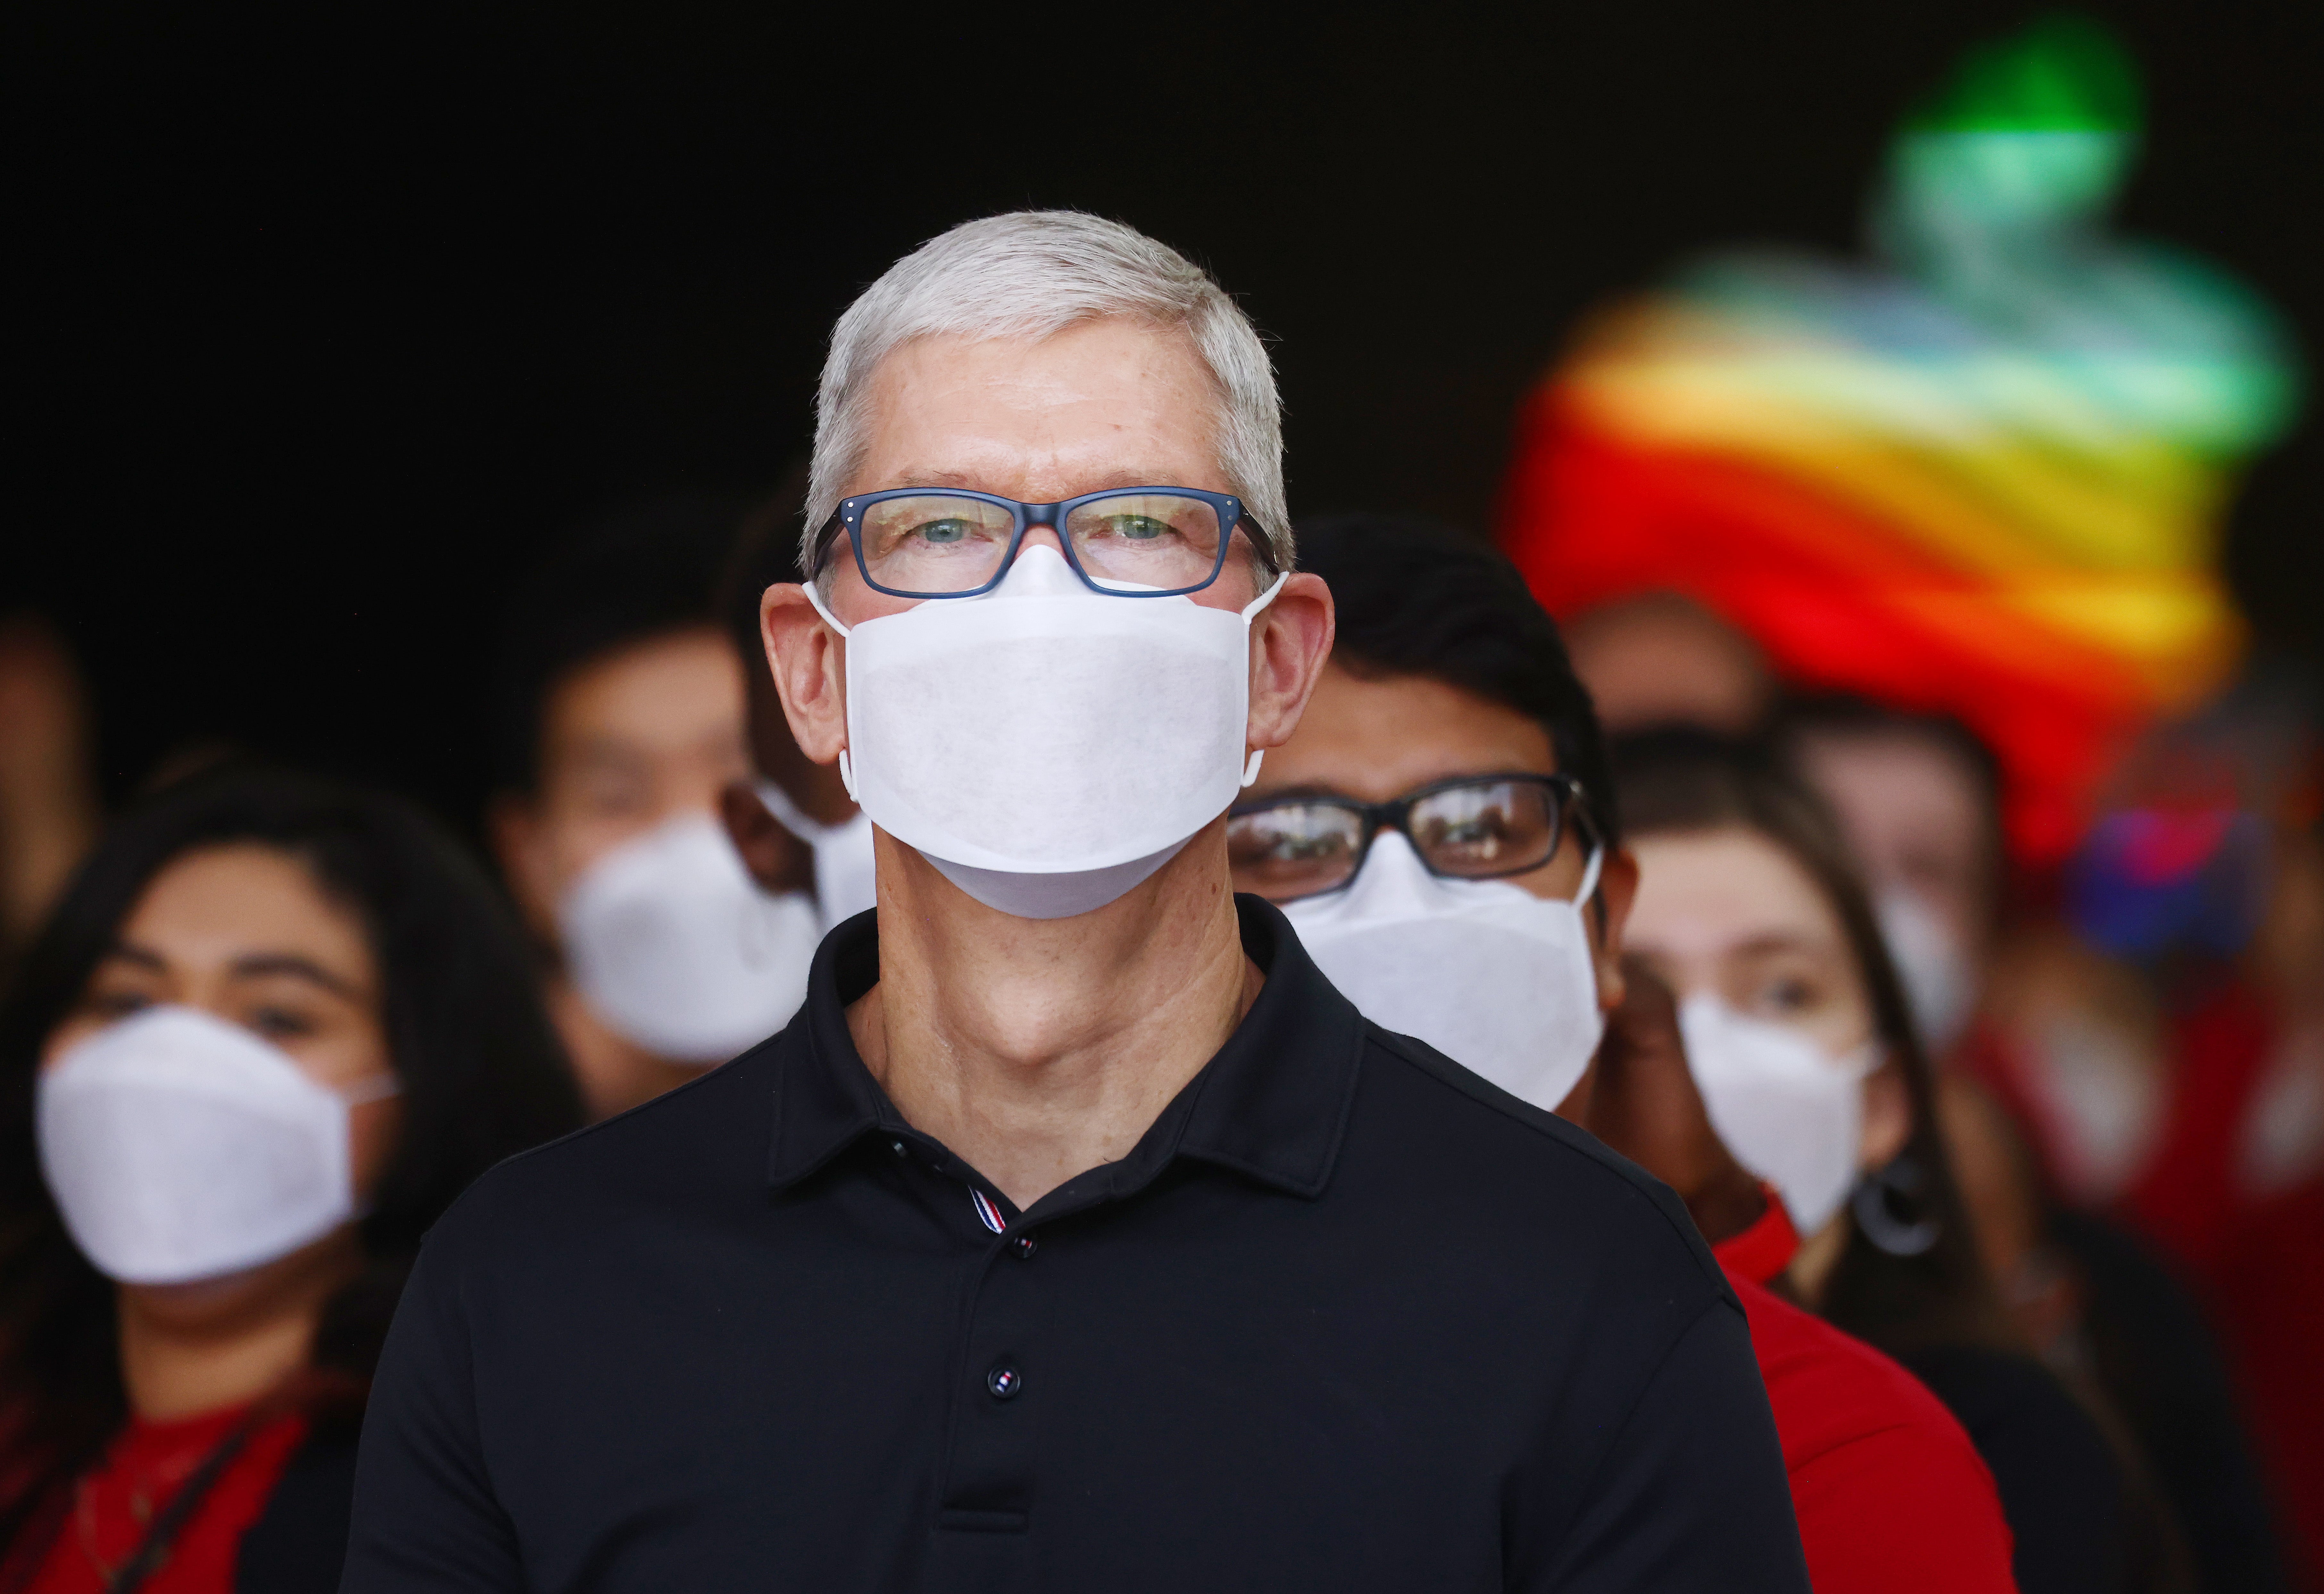 Tim Cook doesn’t have to sift through thousands of emails – a machine can do it for him